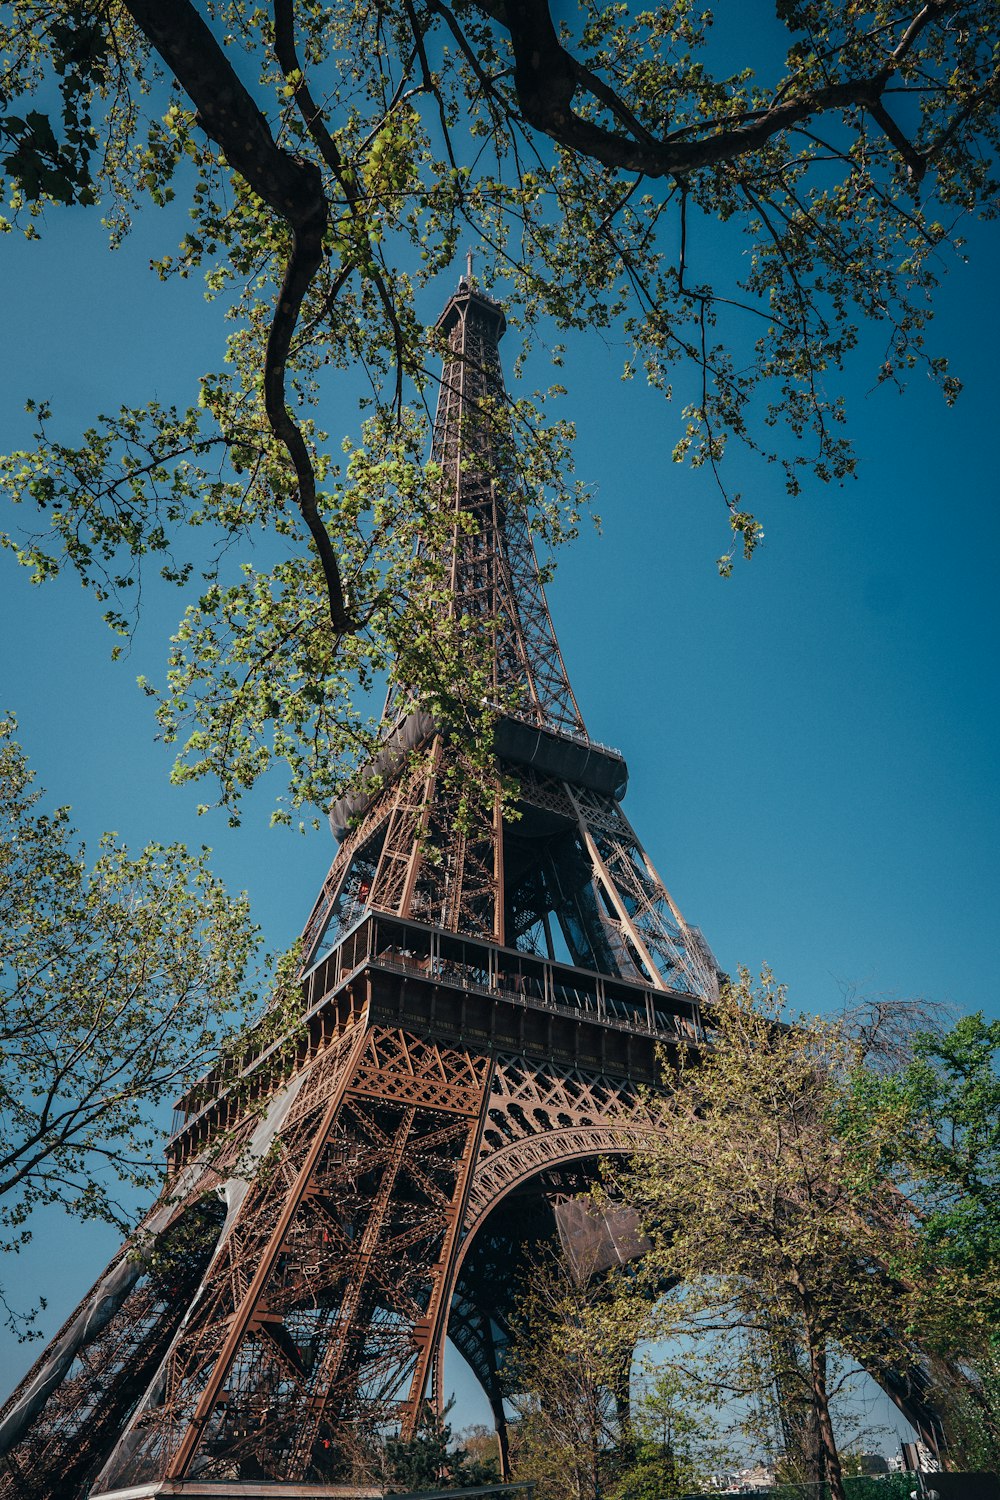 the eiffel tower is surrounded by trees